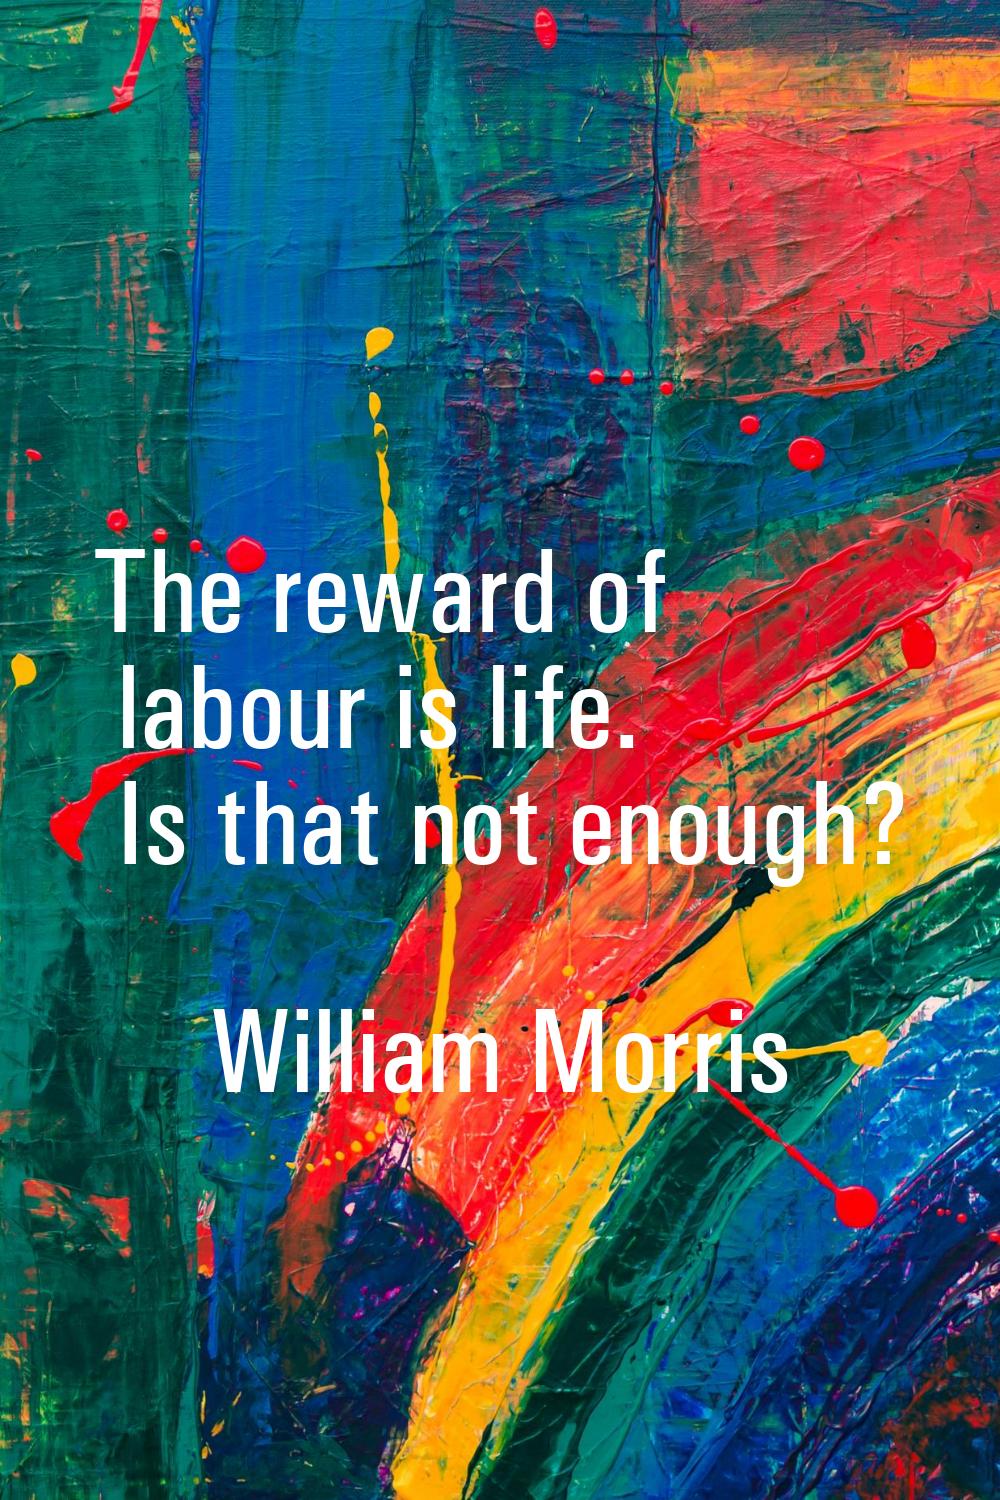 The reward of labour is life. Is that not enough?